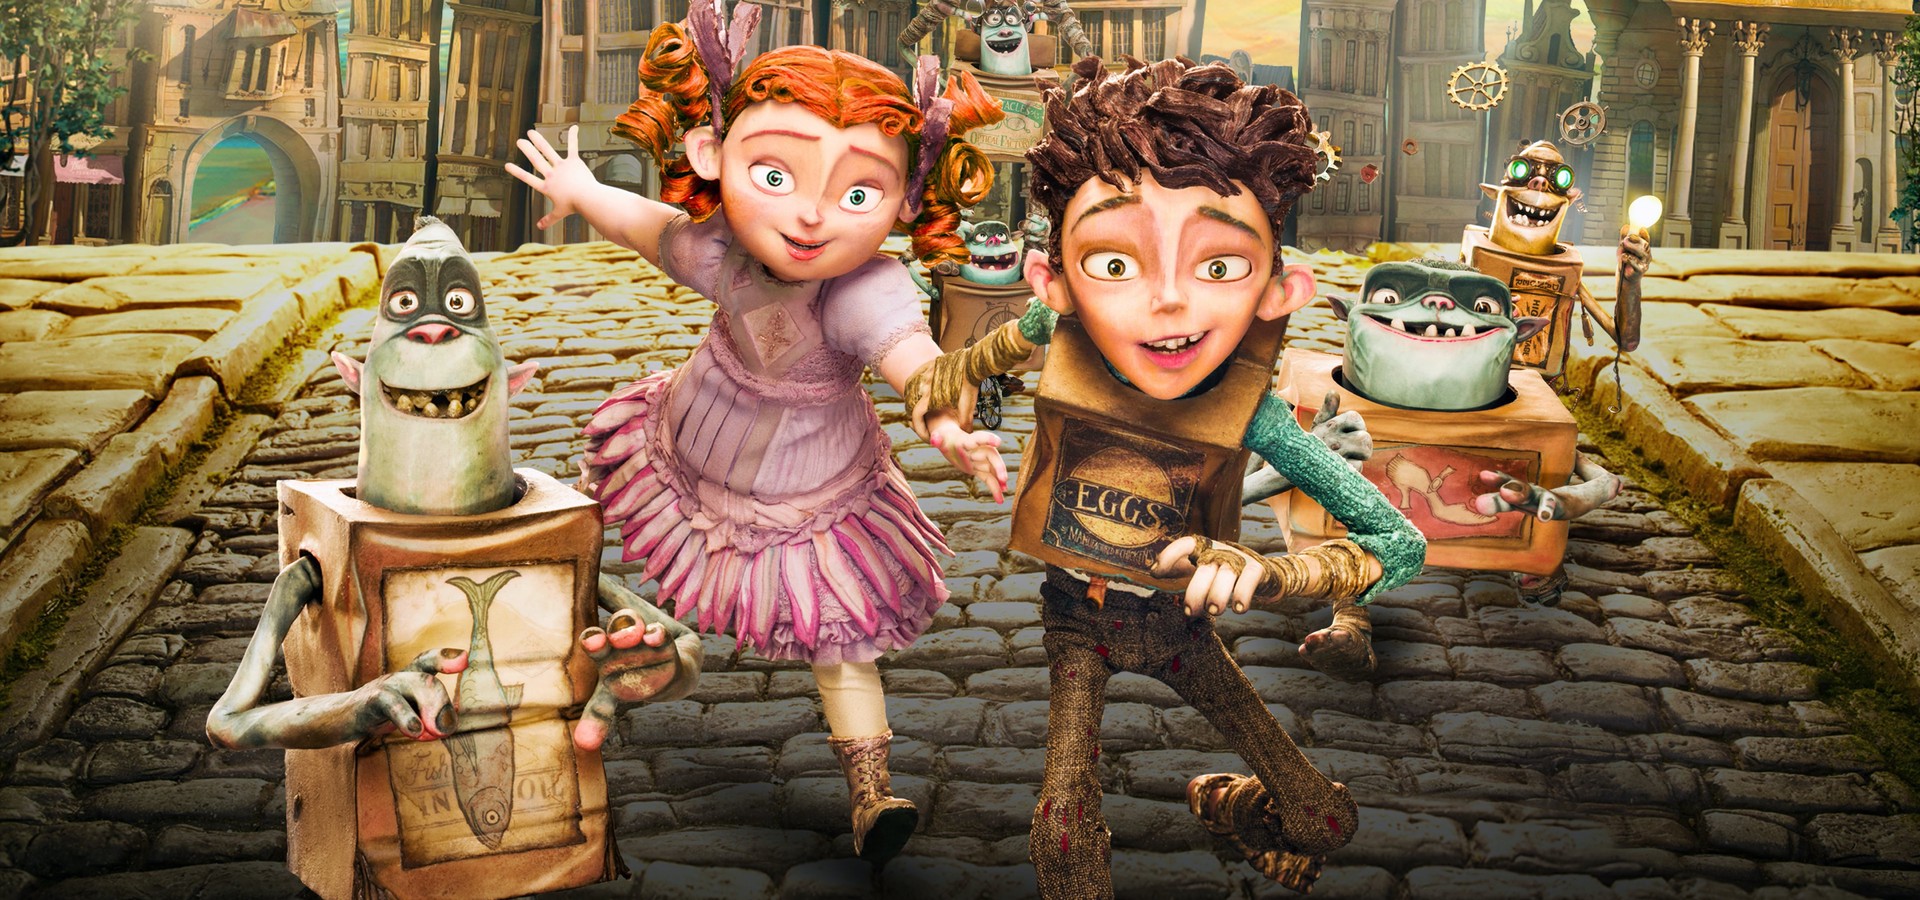 Streaming The Boxtrolls 2014 Full Movies Online